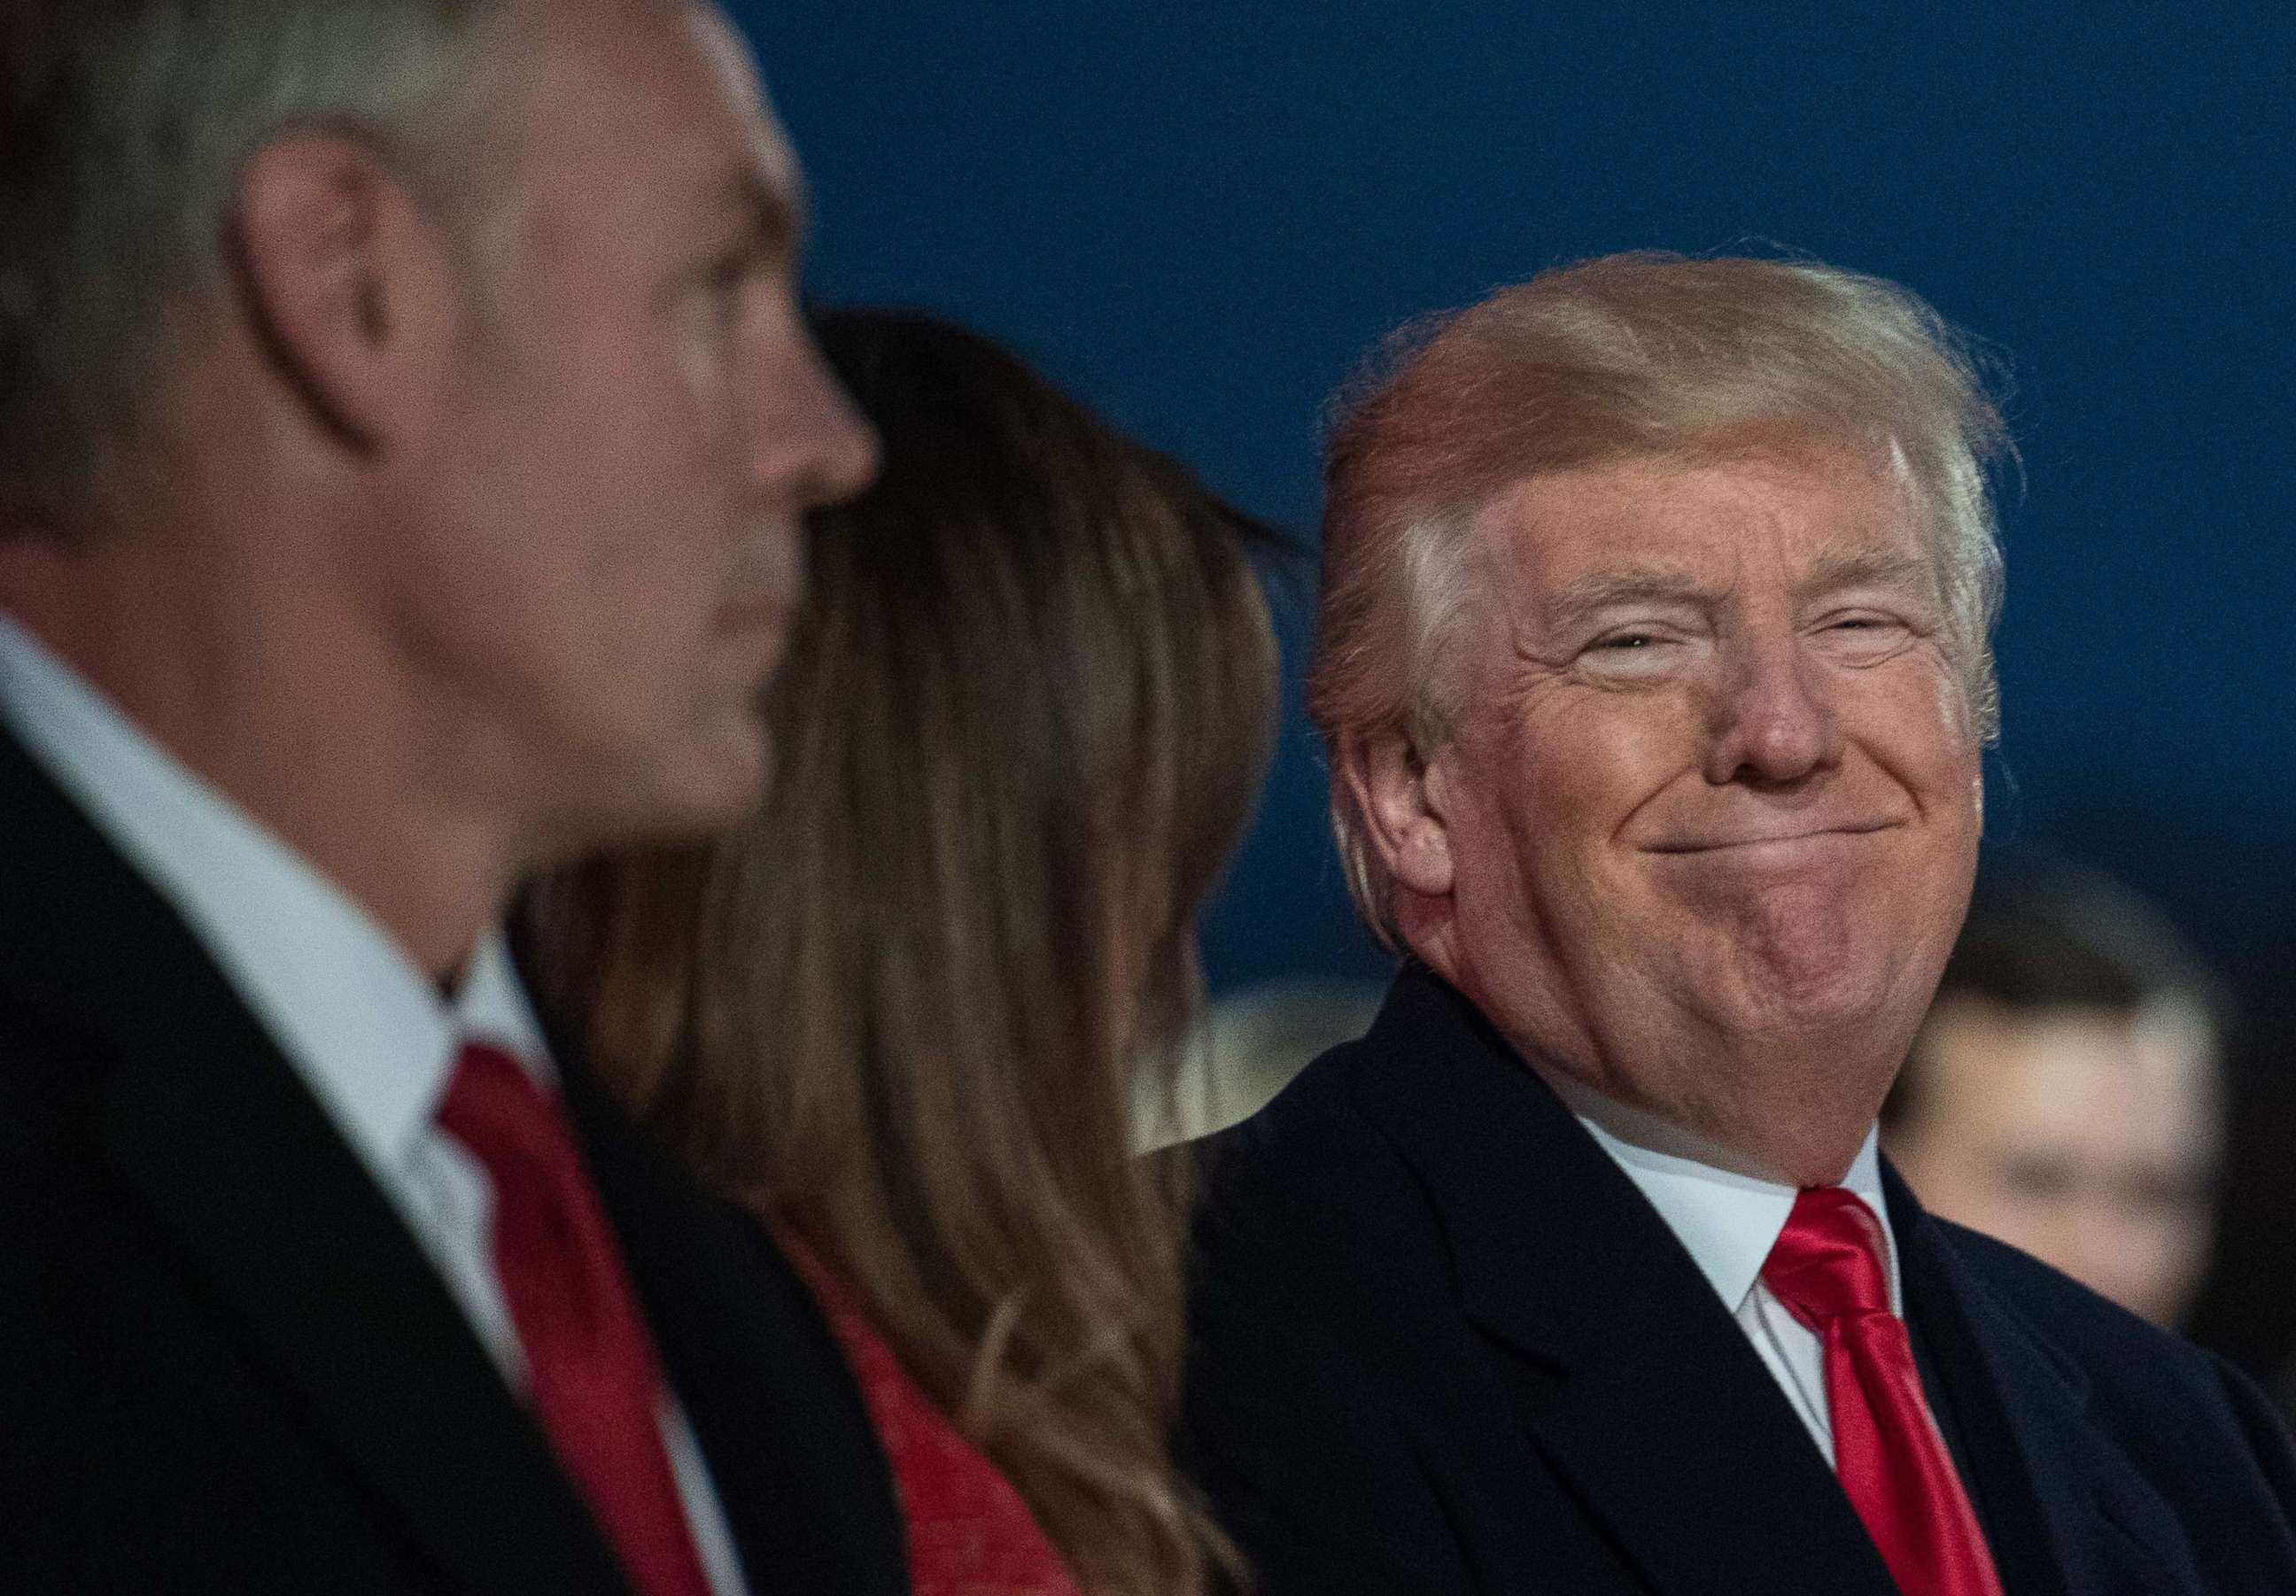 PHOTO: President Donald Trump smiles as Secretary of the Interior Ryan Zinke looks on during the 95th annual National Christmas Tree Lighting ceremony in President's Park near the White House in Washington on Nov. 30, 2017.